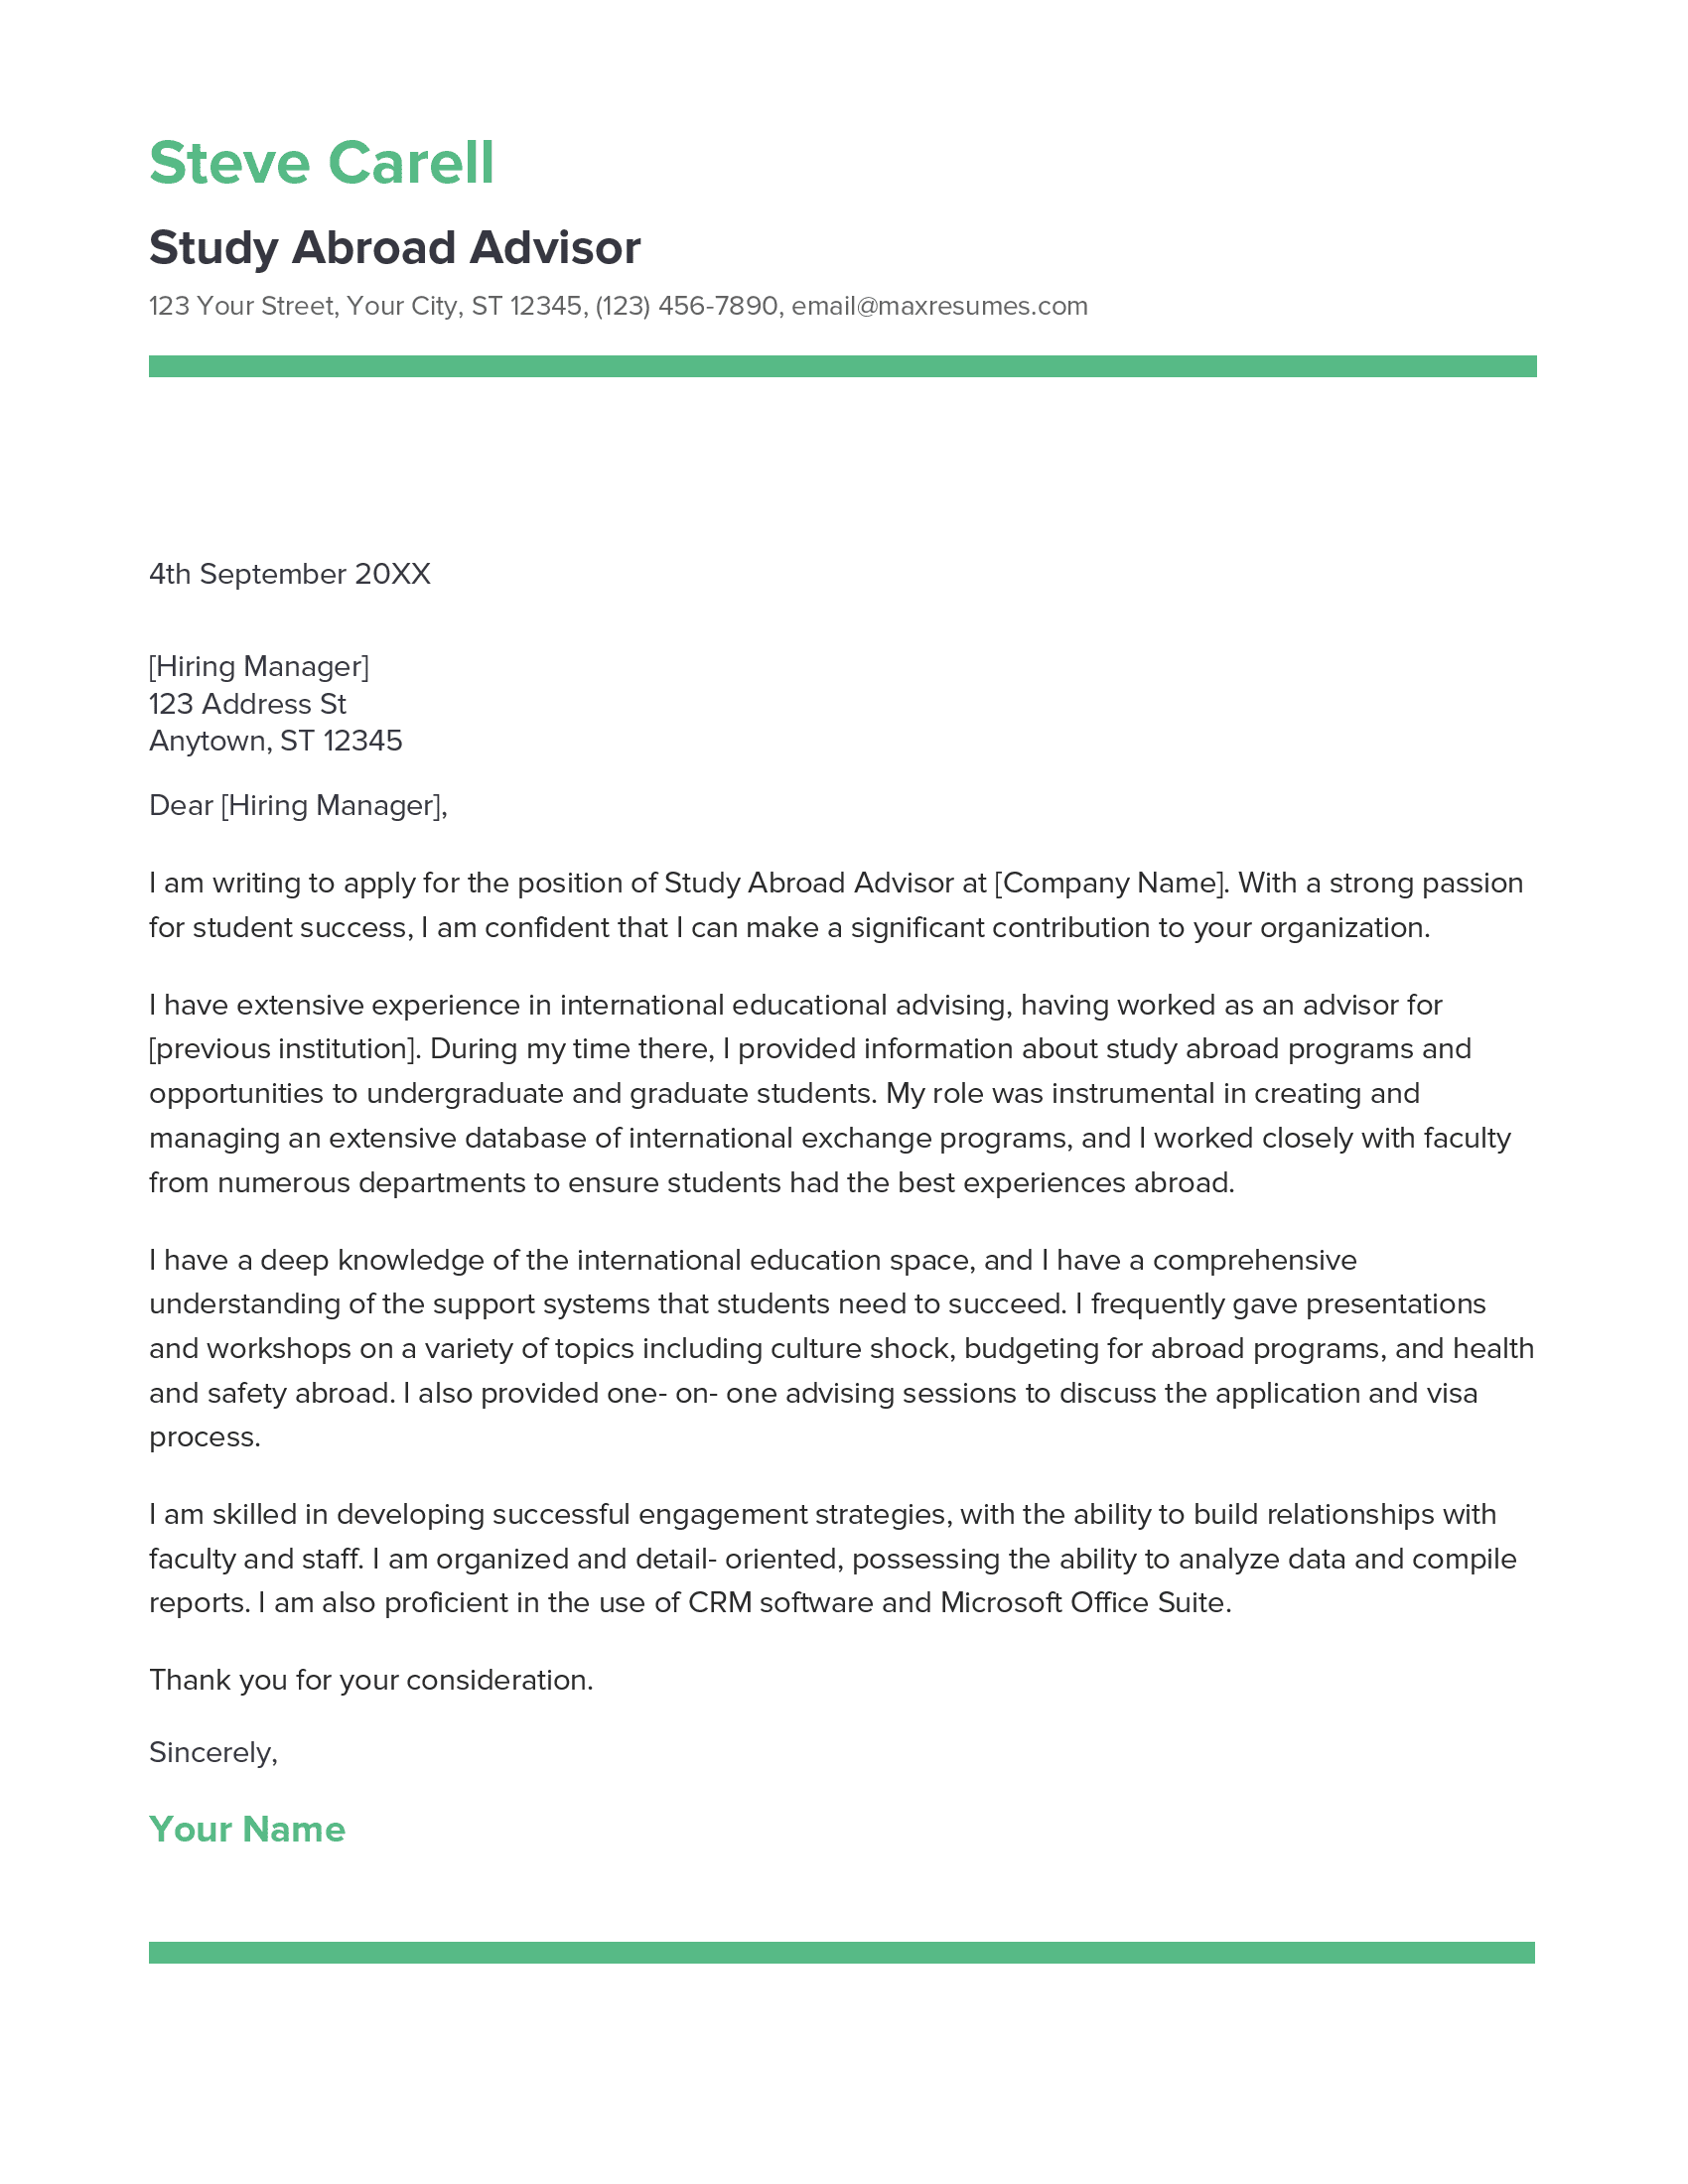 Study Abroad Advisor Cover Letter Example